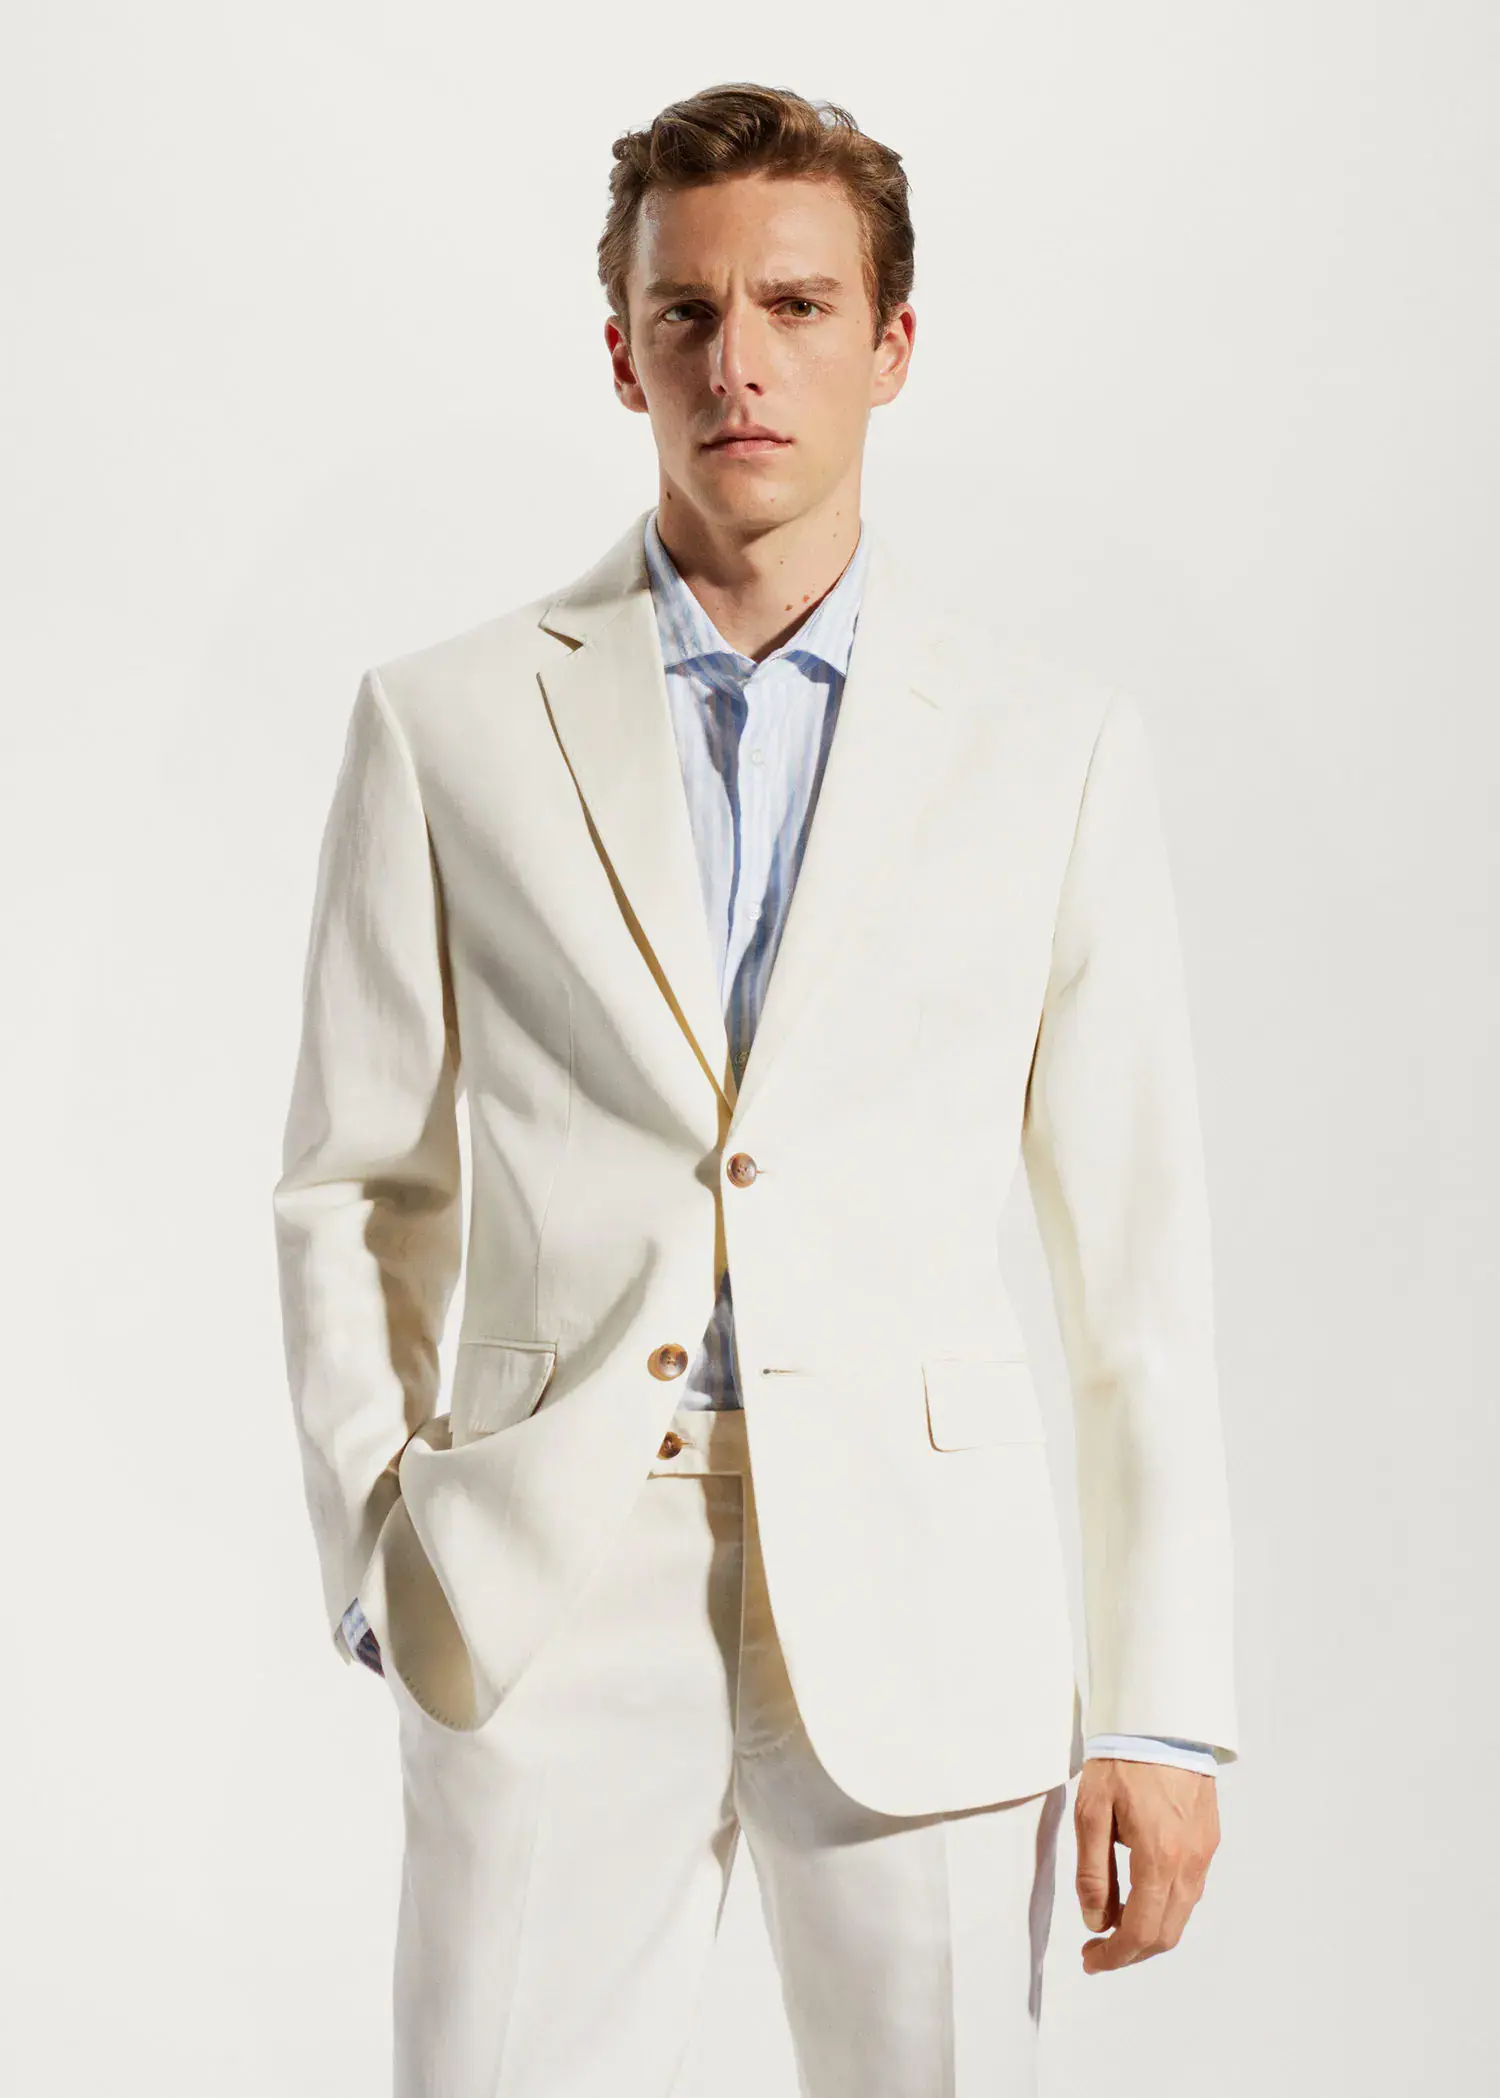 Mango Blazer suit 100% linen. a man in a white suit standing in front of a white wall. 